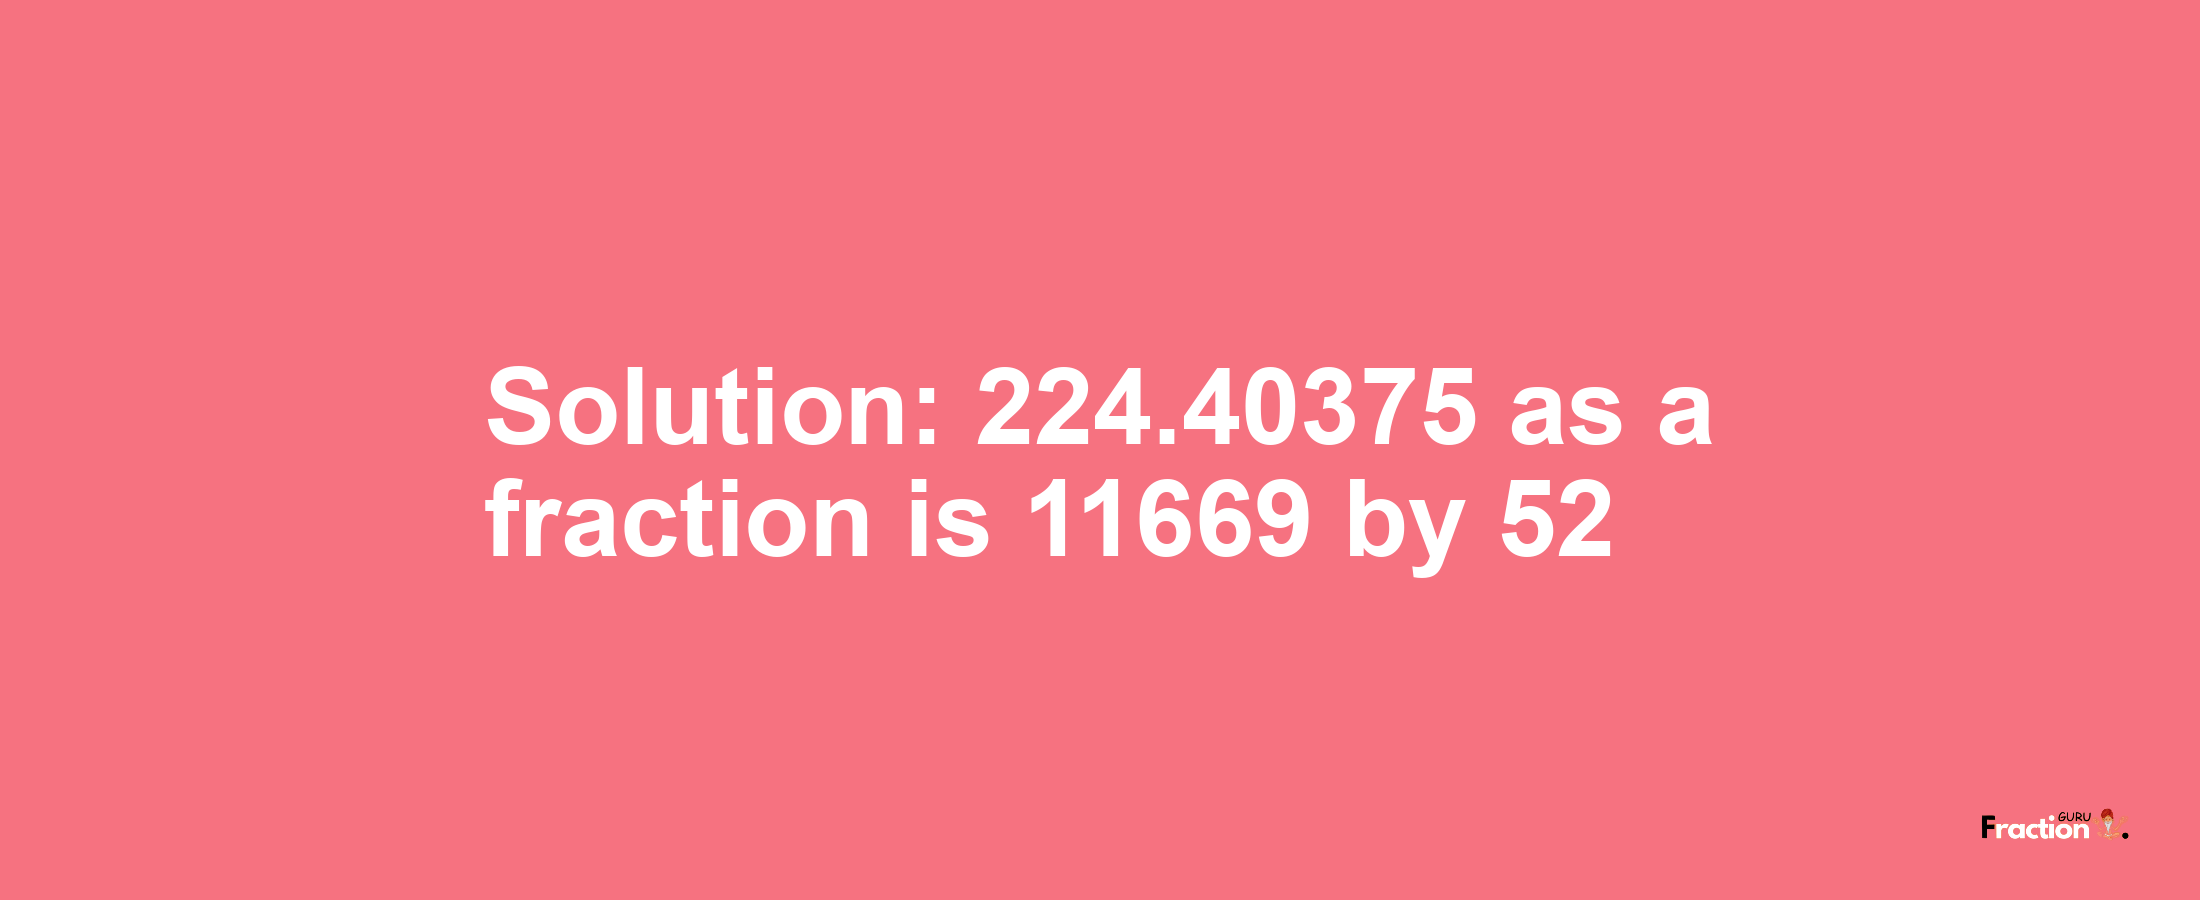 Solution:224.40375 as a fraction is 11669/52